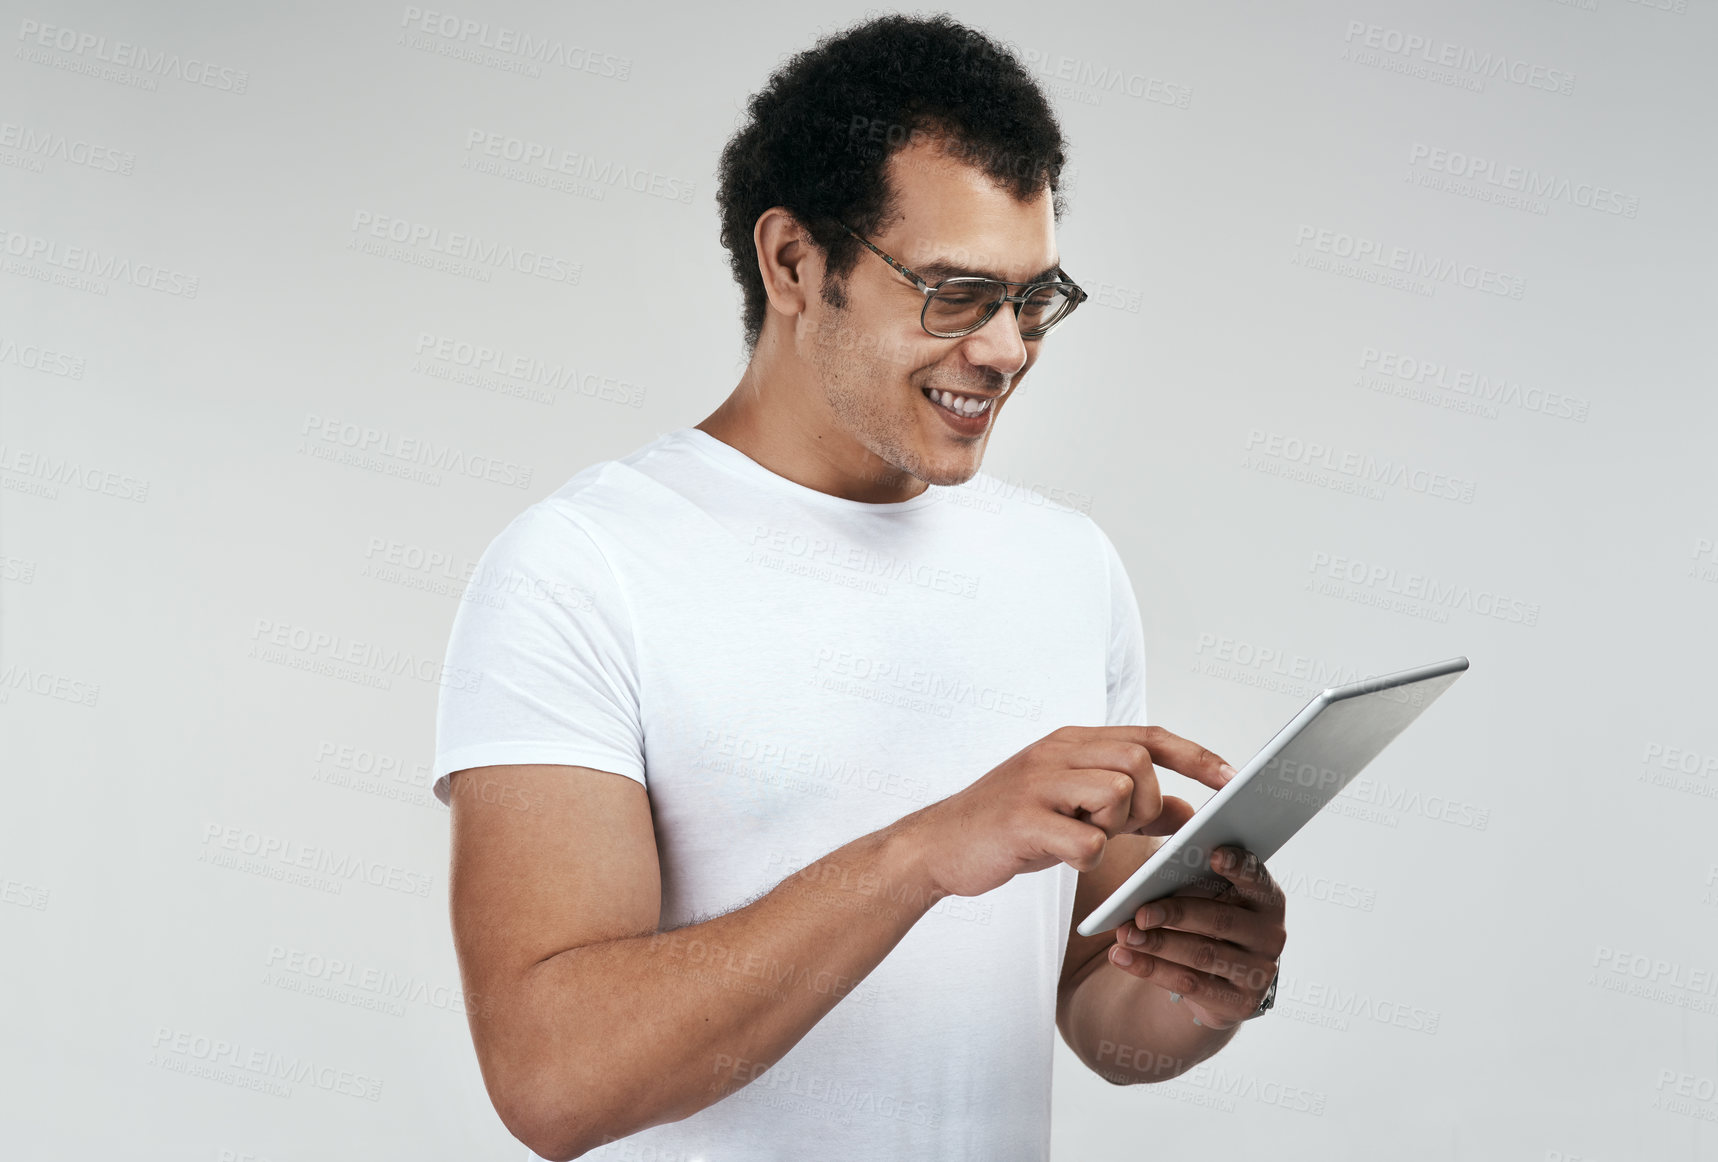 Buy stock photo Shot of a man using a digital tablet while standing against a grey background